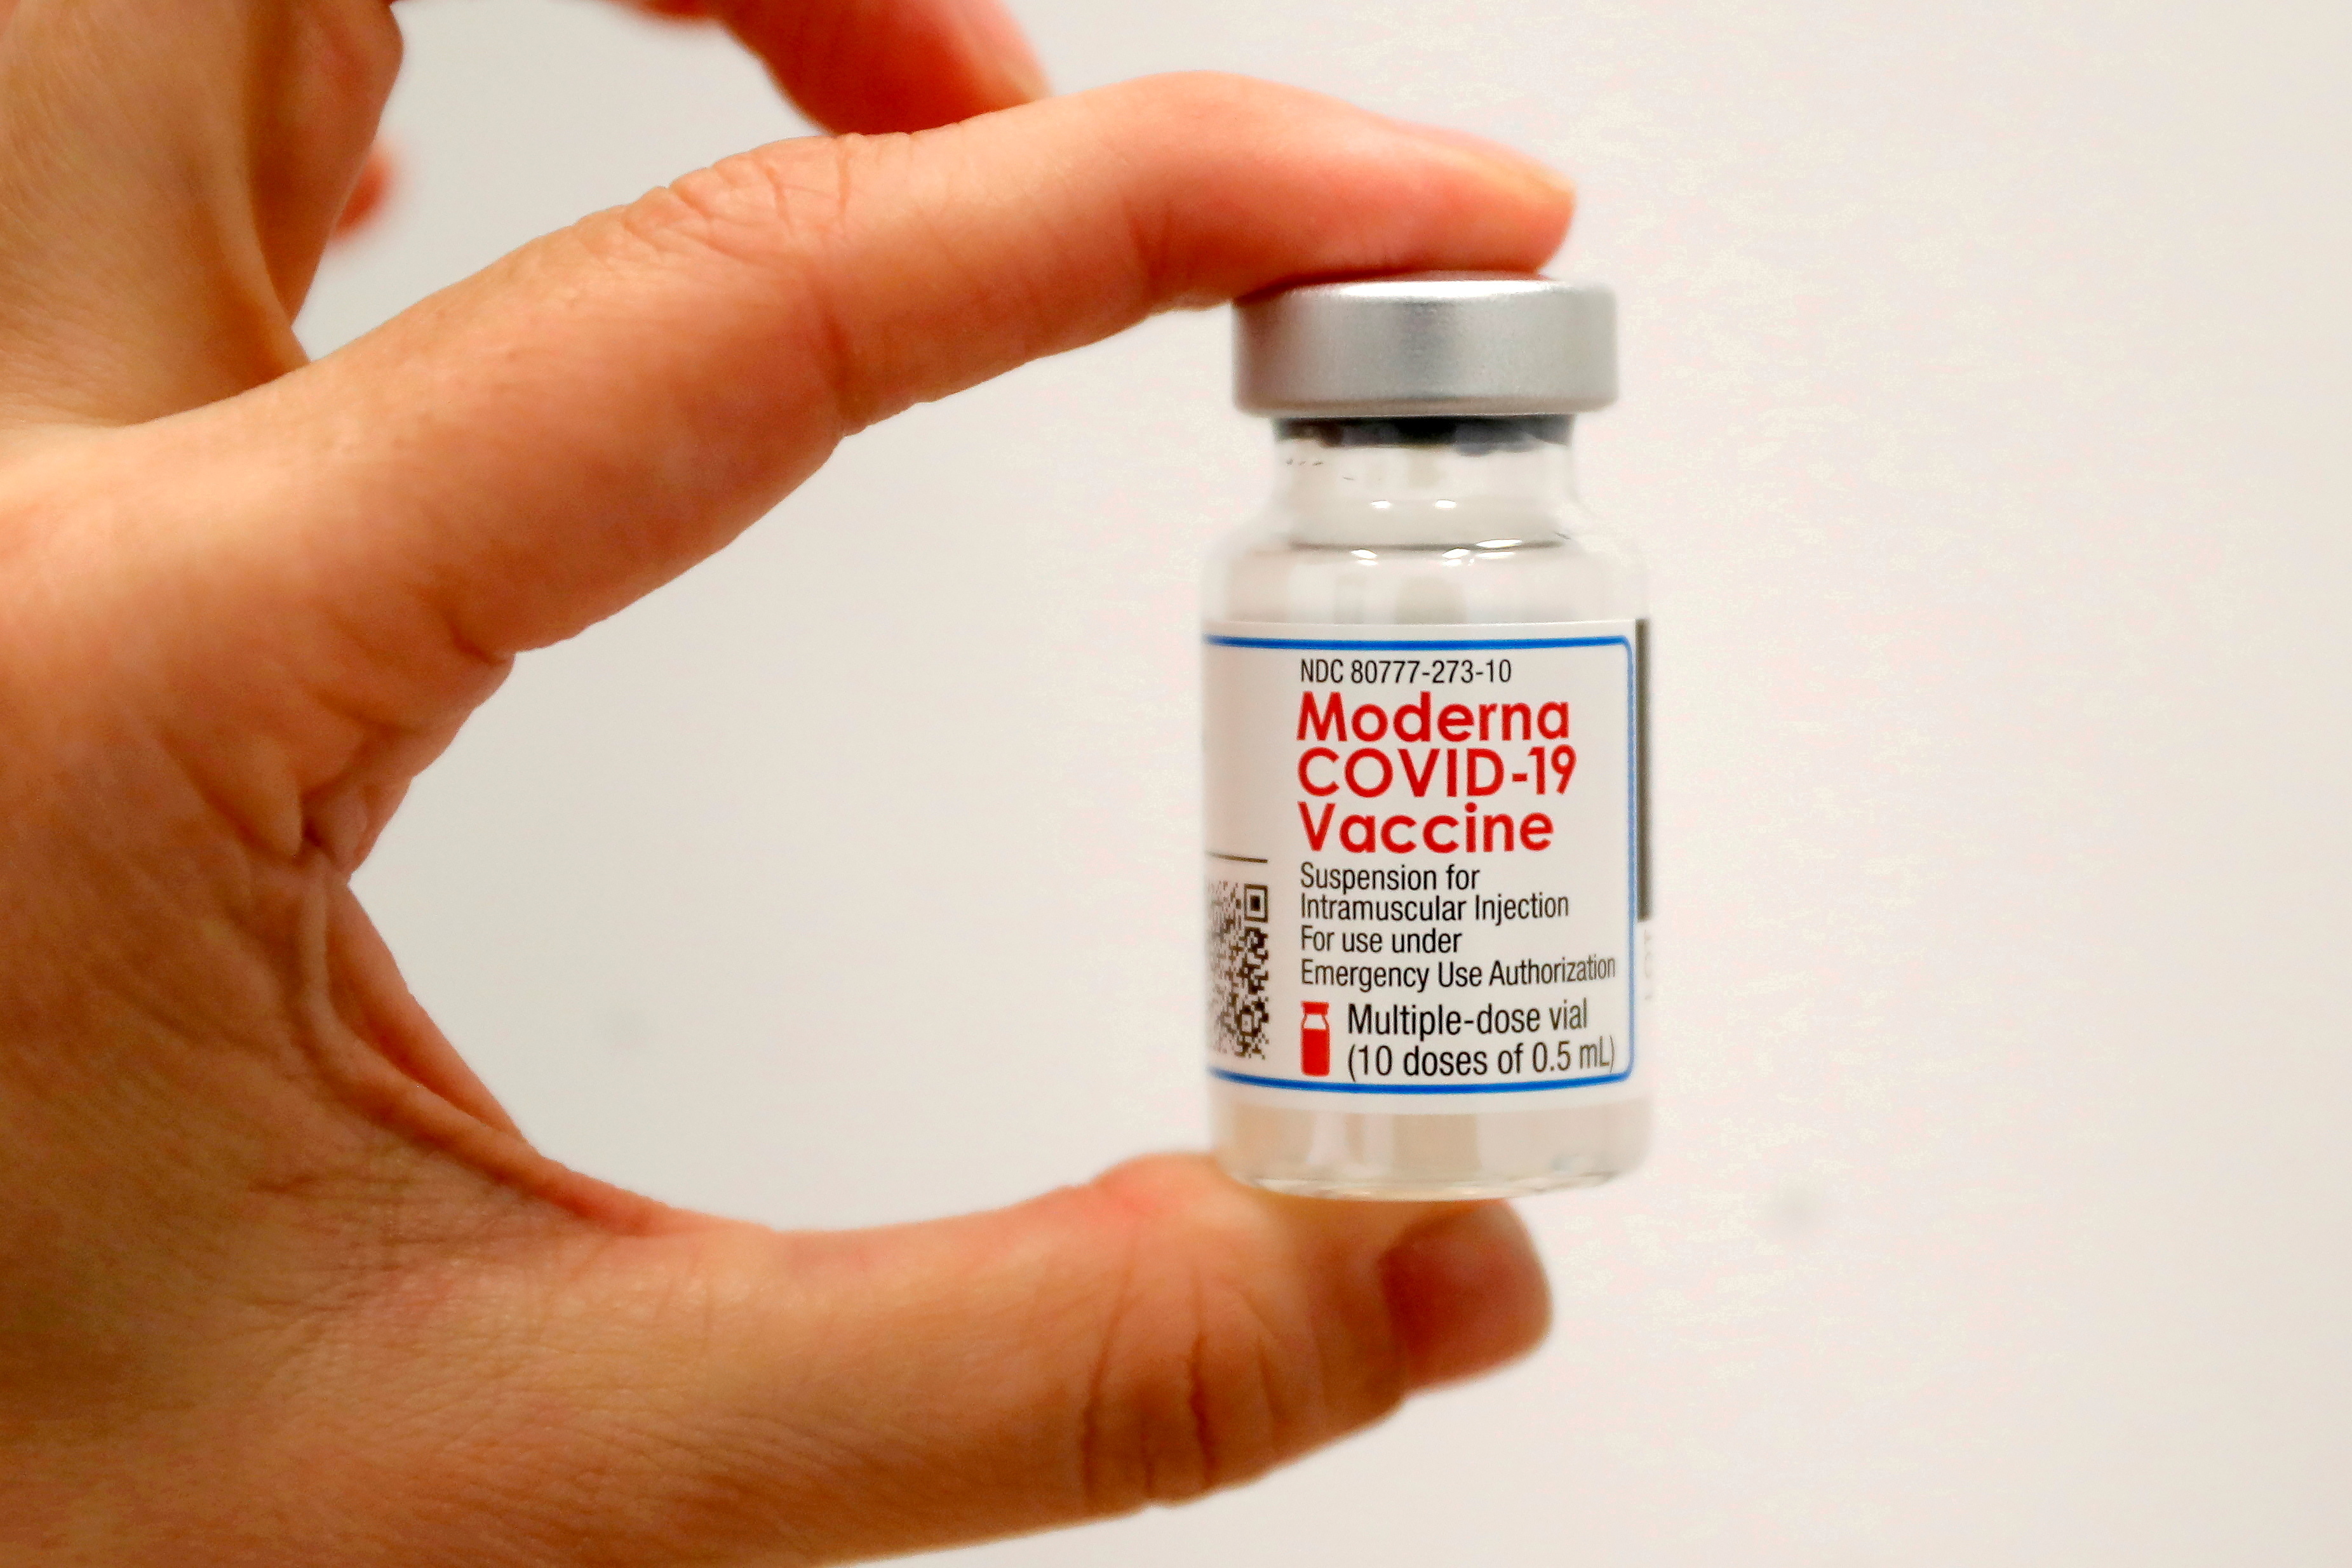 A healthcare worker holds a vial of the Moderna COVID-19 Vaccine at a pop-up vaccination site operated by SOMOS Community Care during the coronavirus disease (COVID-19) pandemic in Manhattan in New York City, New York, U.S., January 29, 2021. REUTERS/Mike Segar